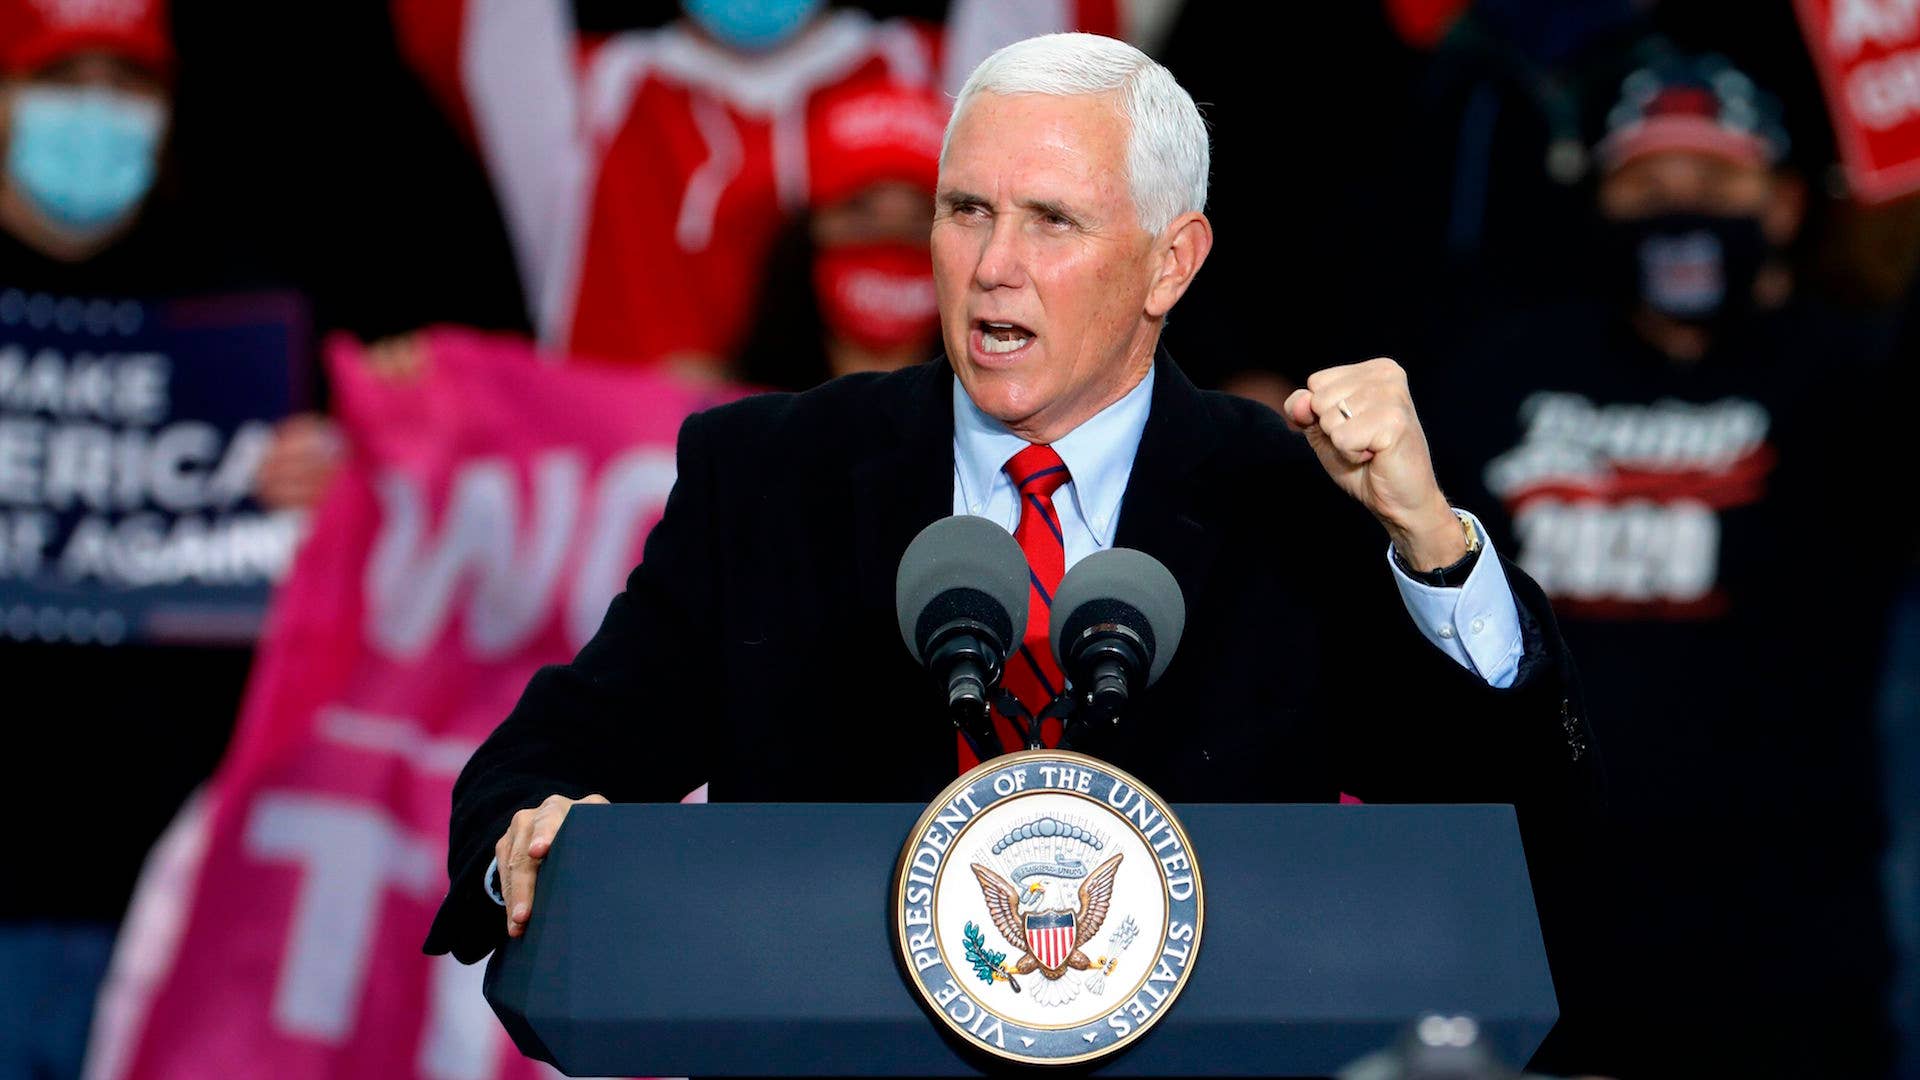 Mike Pence speaks during a "Make America Great Again!" campaign event